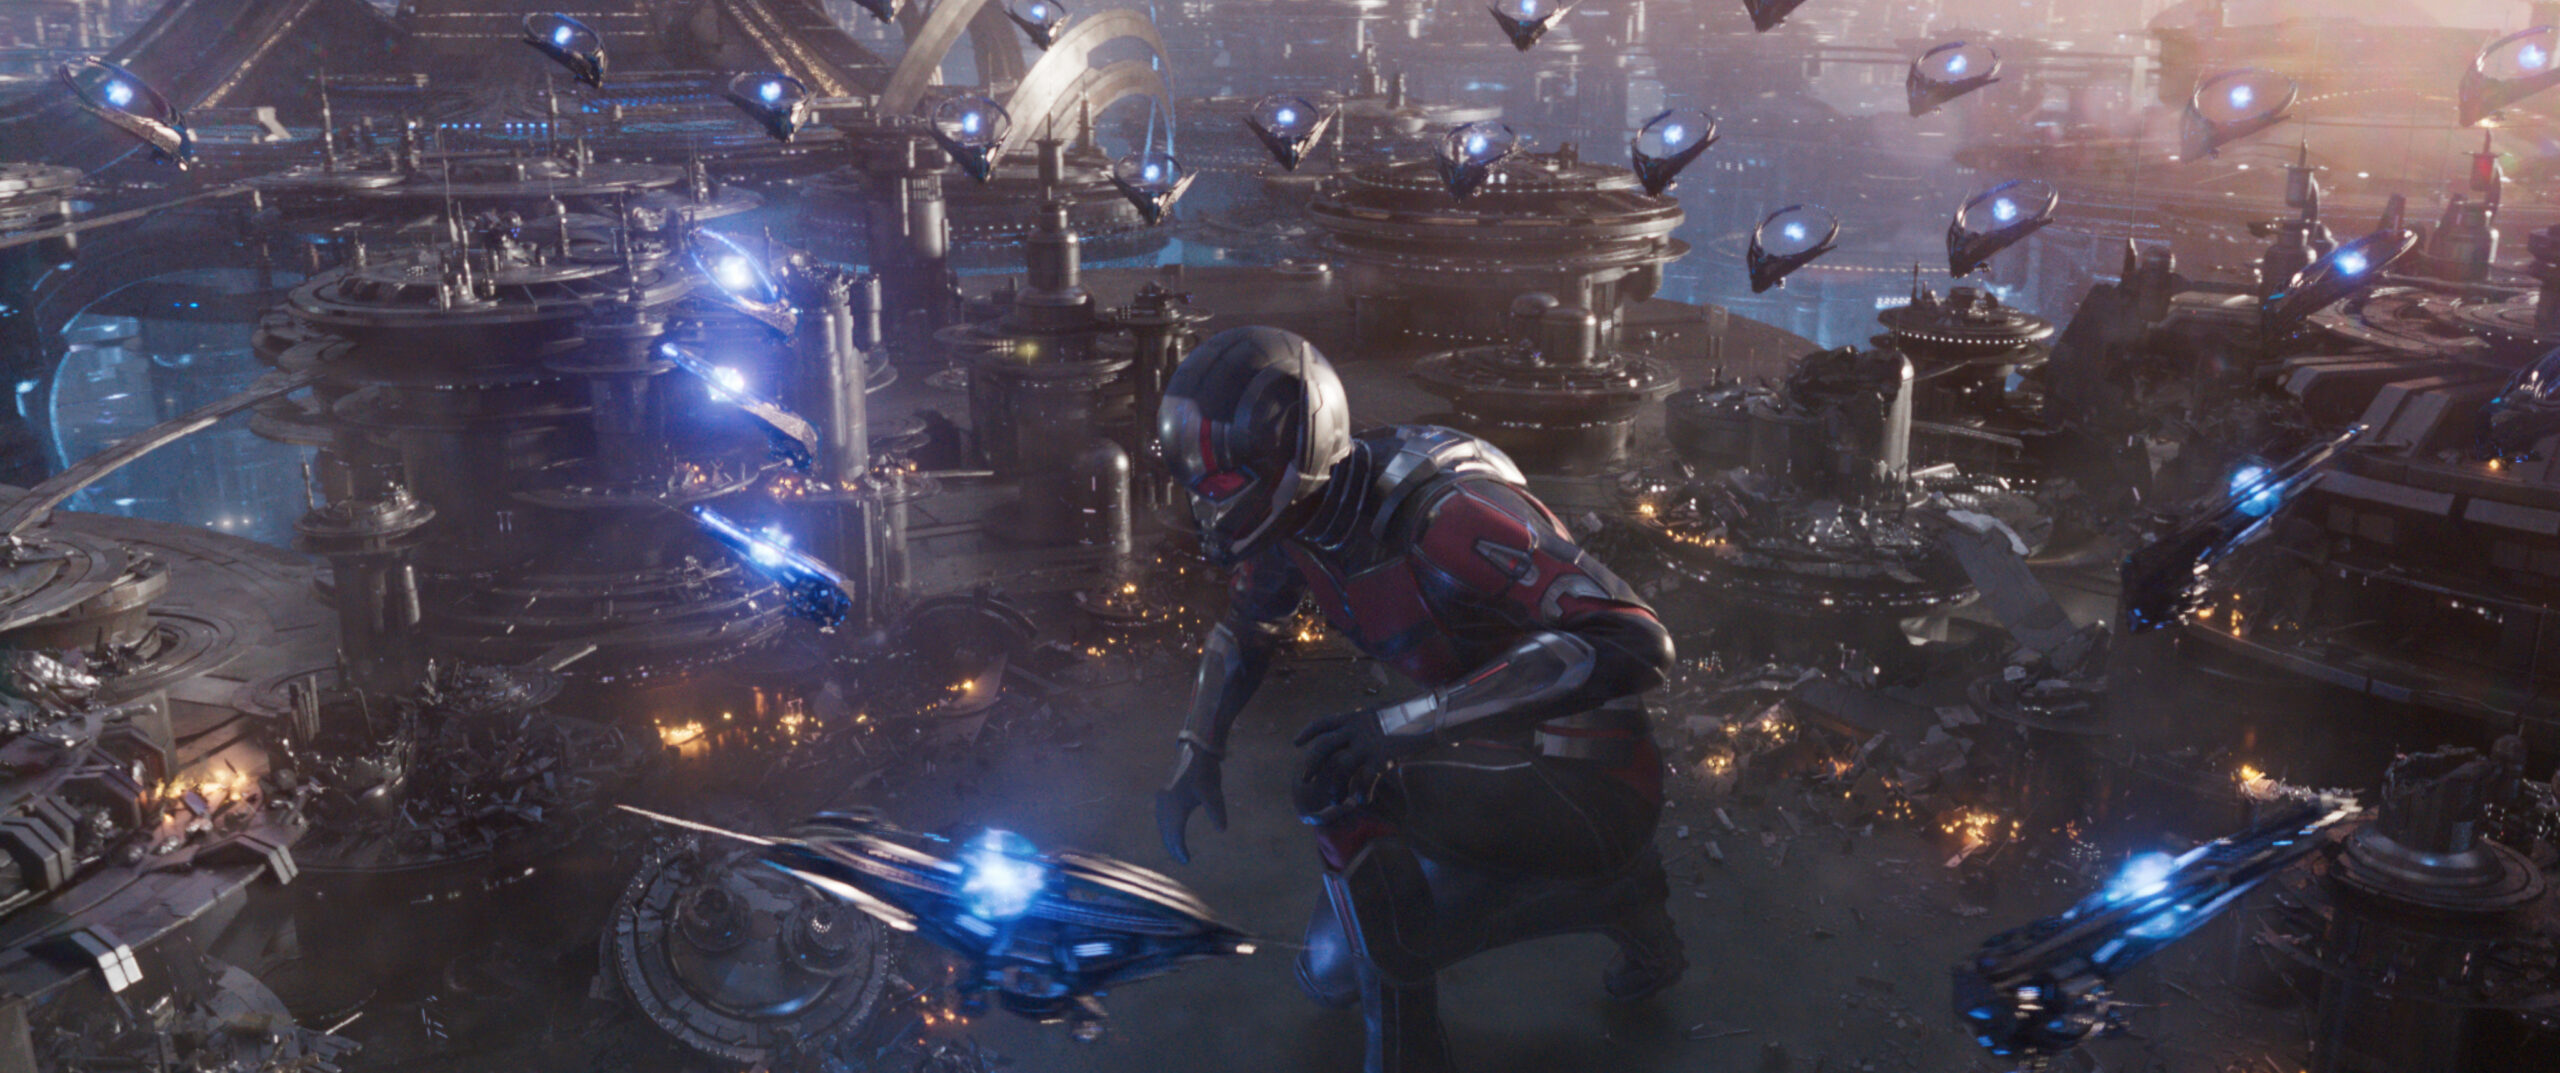 (L-R): Paul Rudd as Scott Lang/Ant-Man in Marvel Studios' ANT-MAN AND THE WASP: QUANTUMANIA. Photo courtesy of Marvel Studios. © 2022 MARVEL.